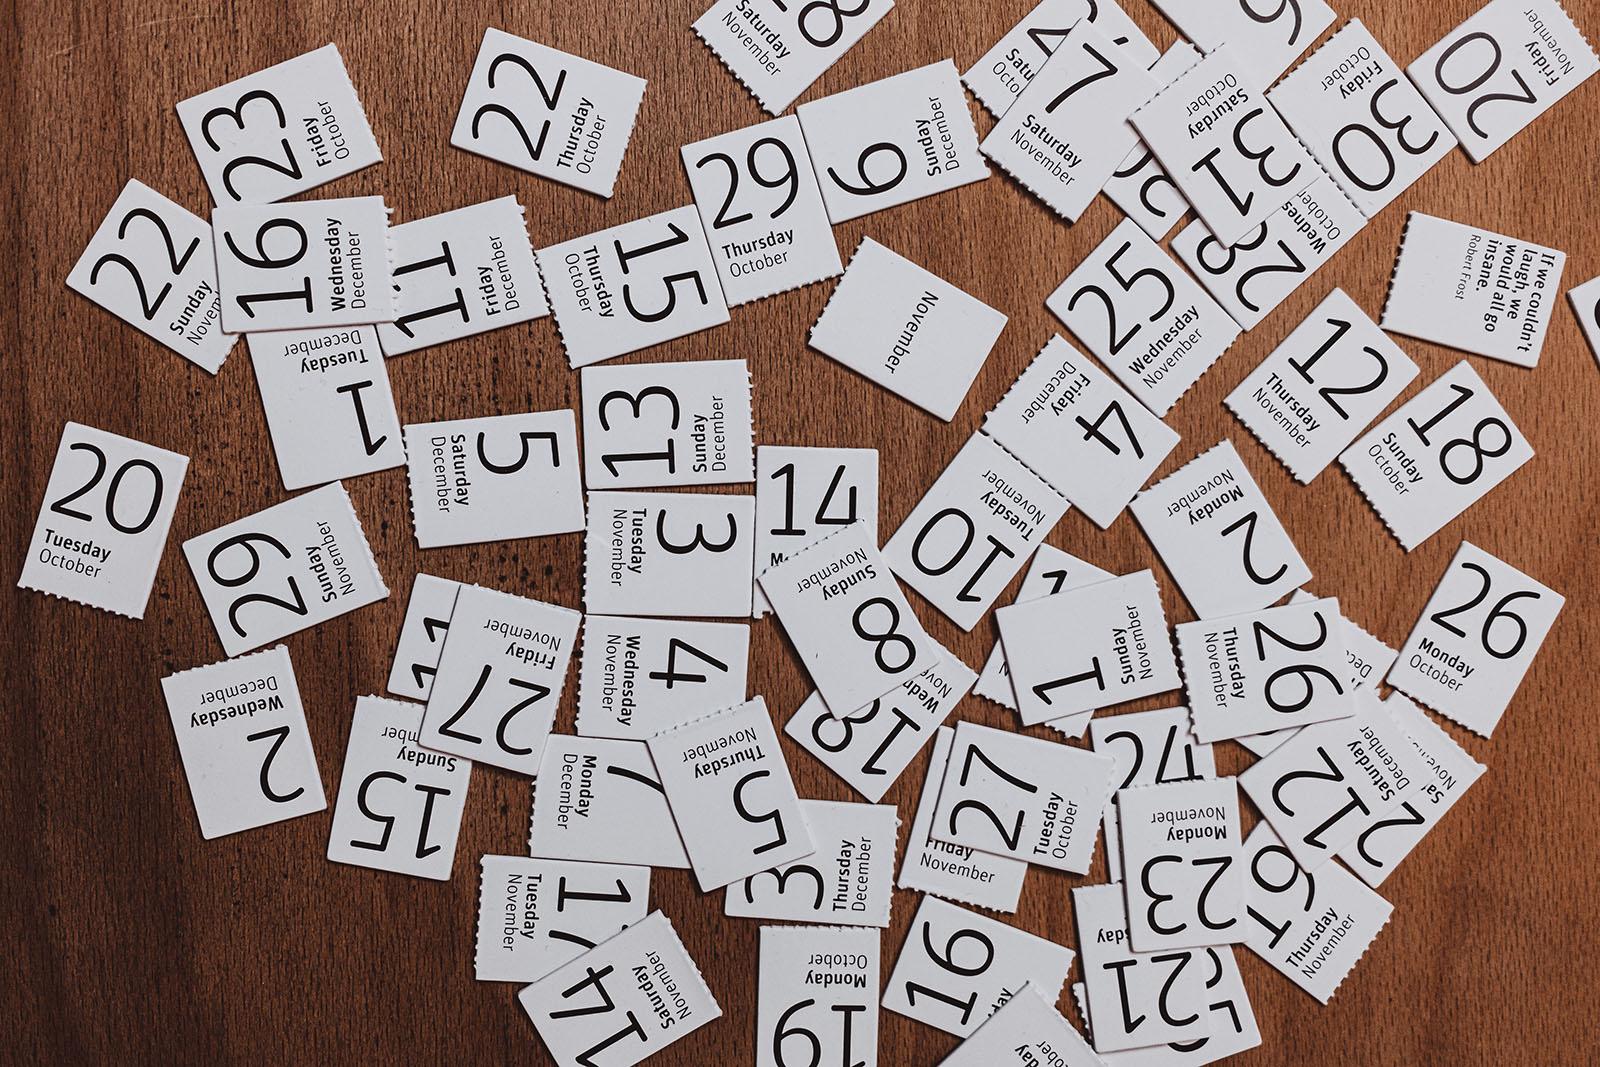 Many calendar cards on a table - Image: https://unsplash.com/@purzlbaum